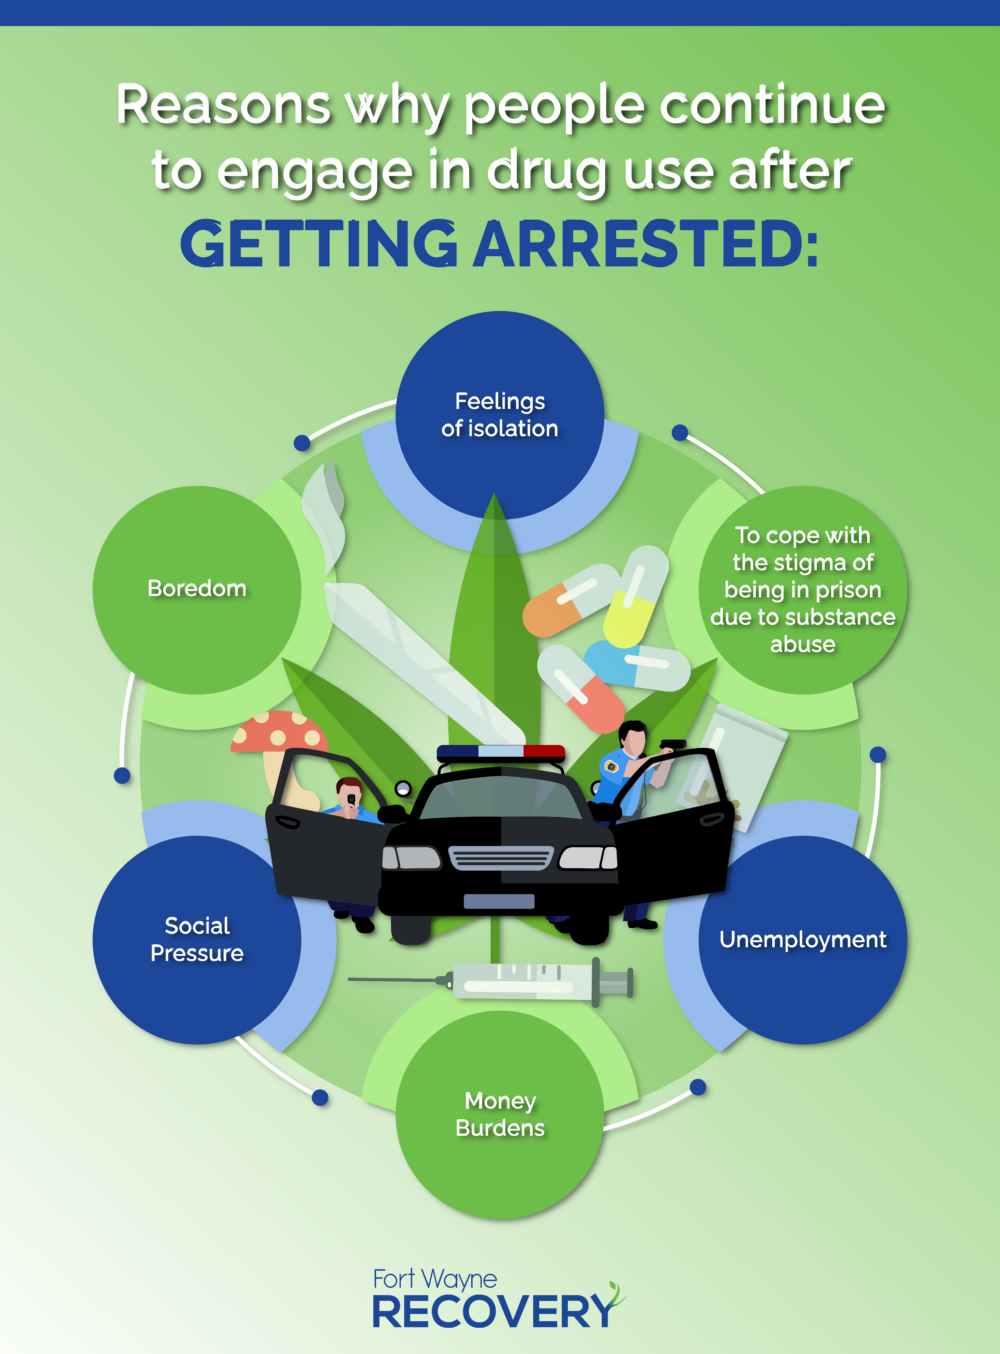 Reasons People Continue to Use Drugs After Getting Arrested Infographic Fort Wayne Recovery